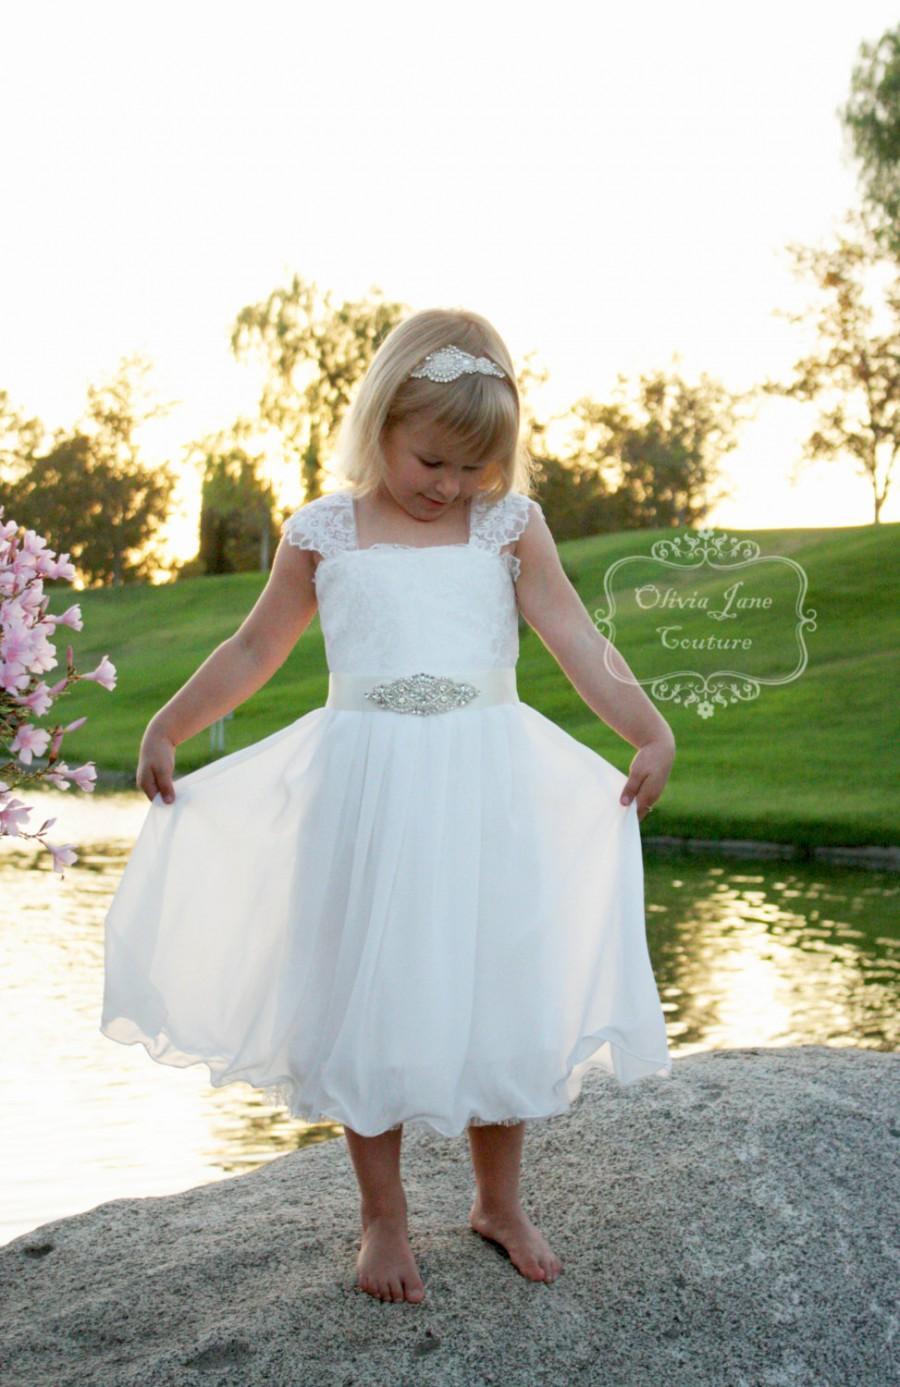 Wedding - Claire Flower Girl Dress - Ivory Lace Flower Girl Dress - Birthday dress - Baptism dress - Boho Flower Girl Dress-Girls White Chiffon Dress